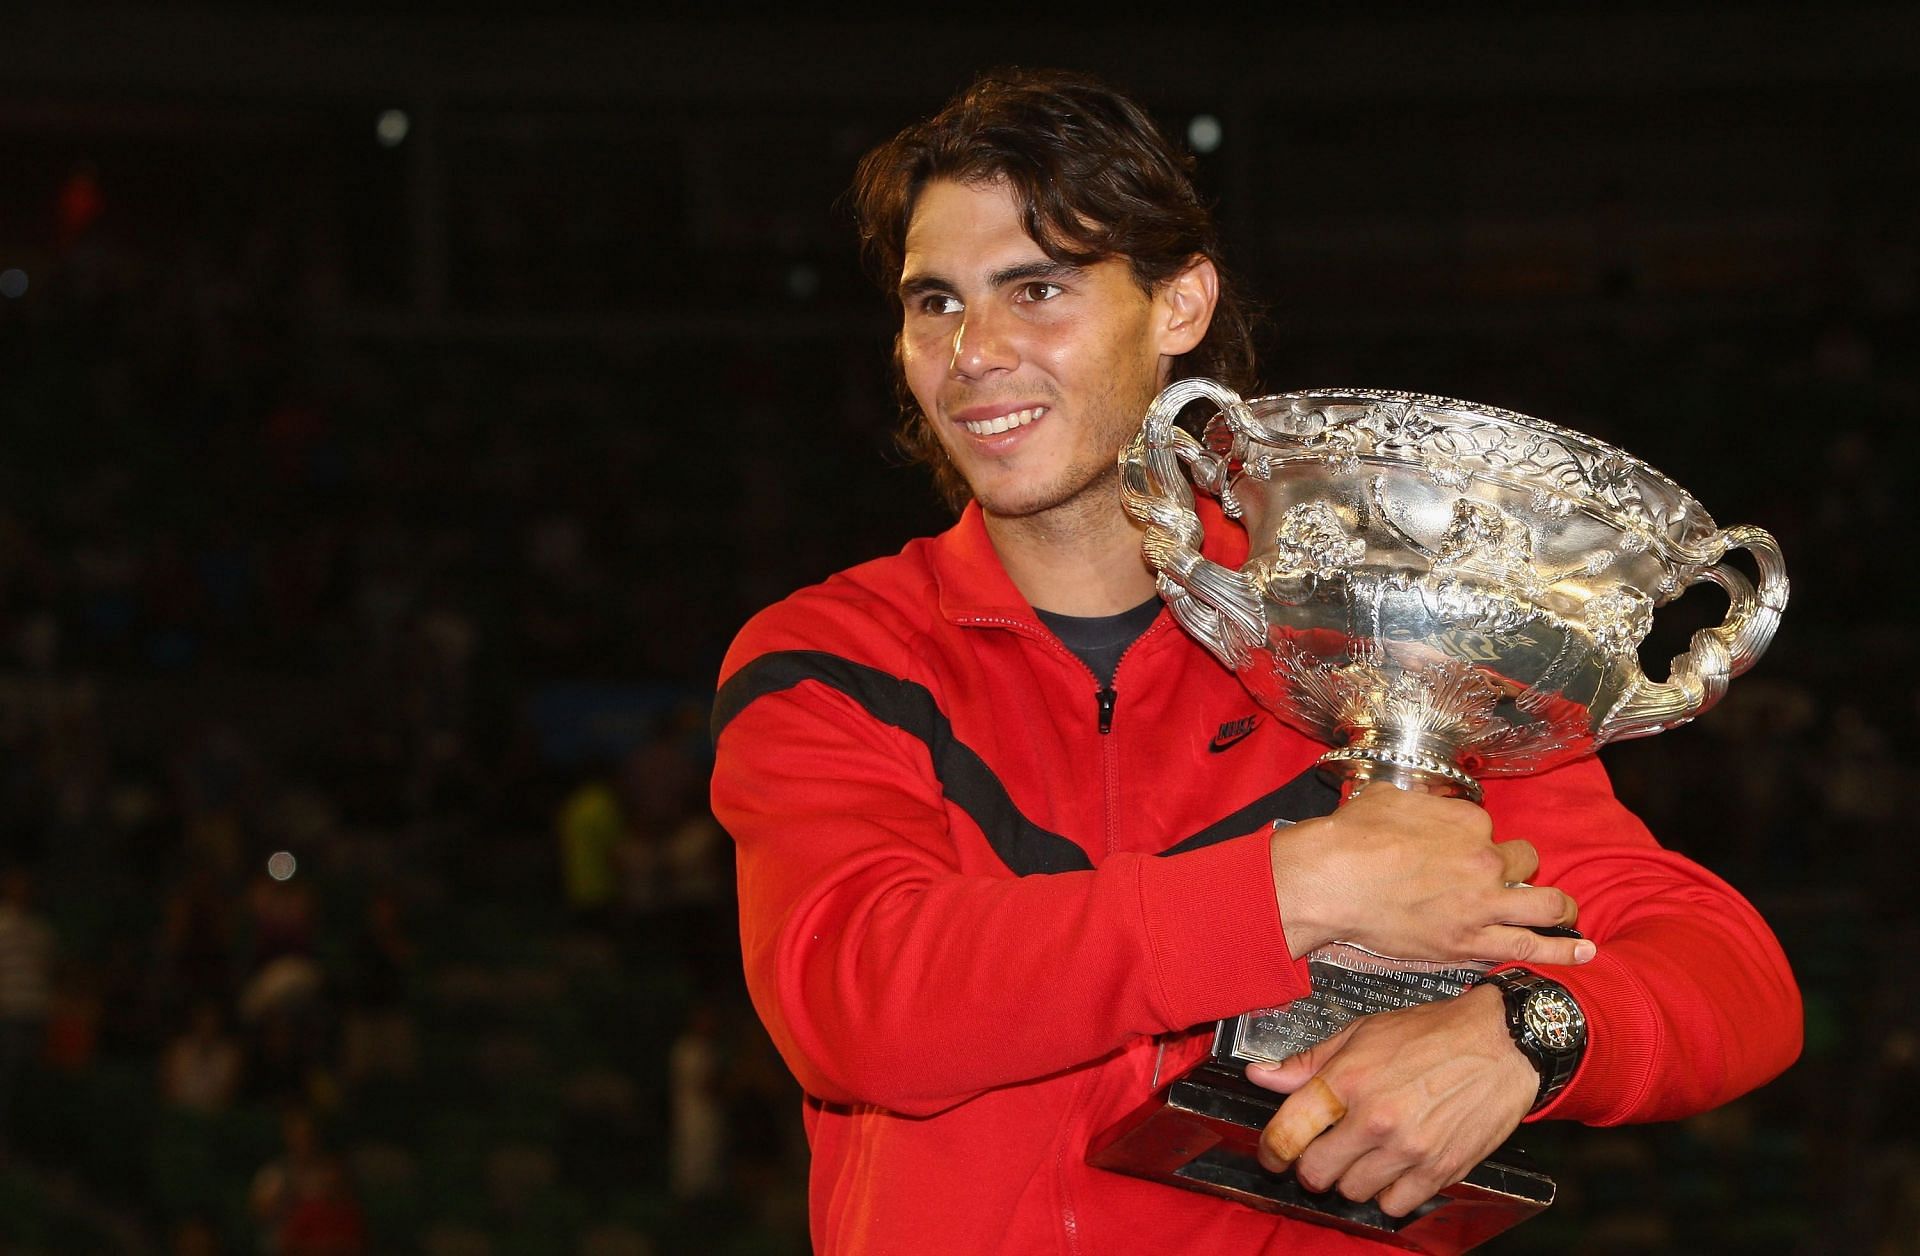 Rafael Nadal with the Norman Brookes Challenge Cup after winning the 2009 Australian Open